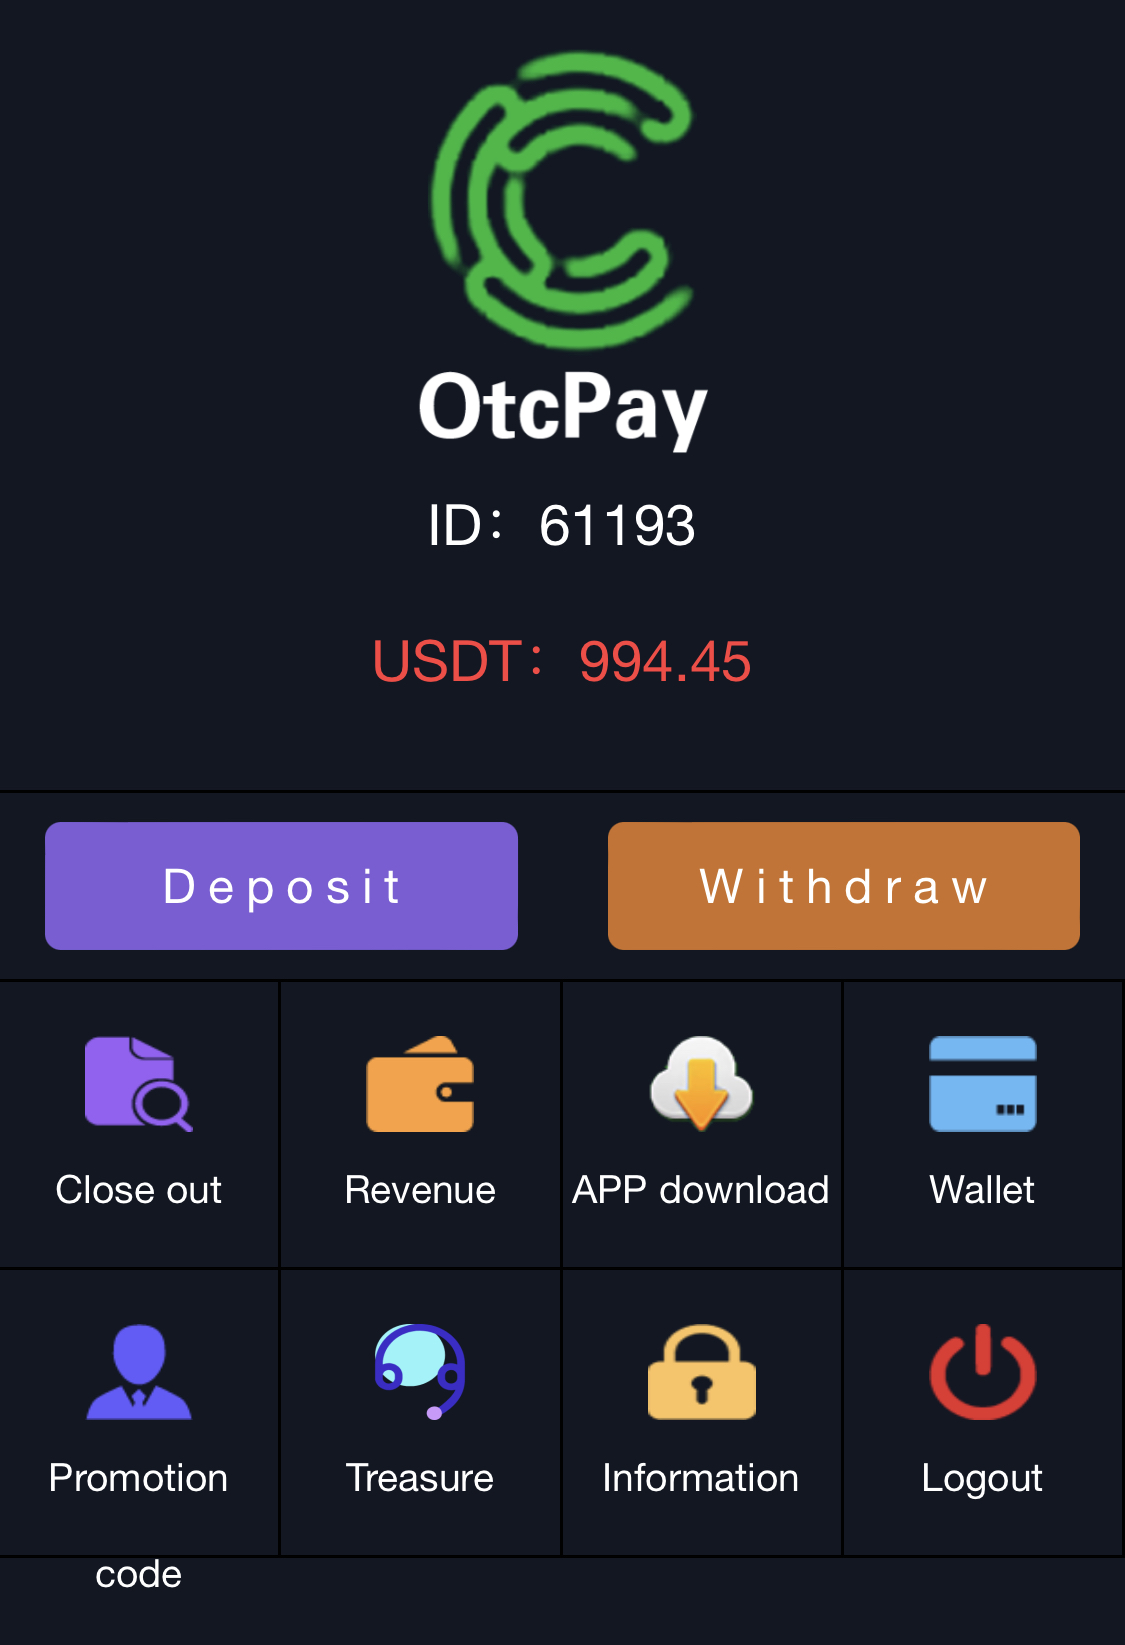 The fake interface that is controlled by scammer